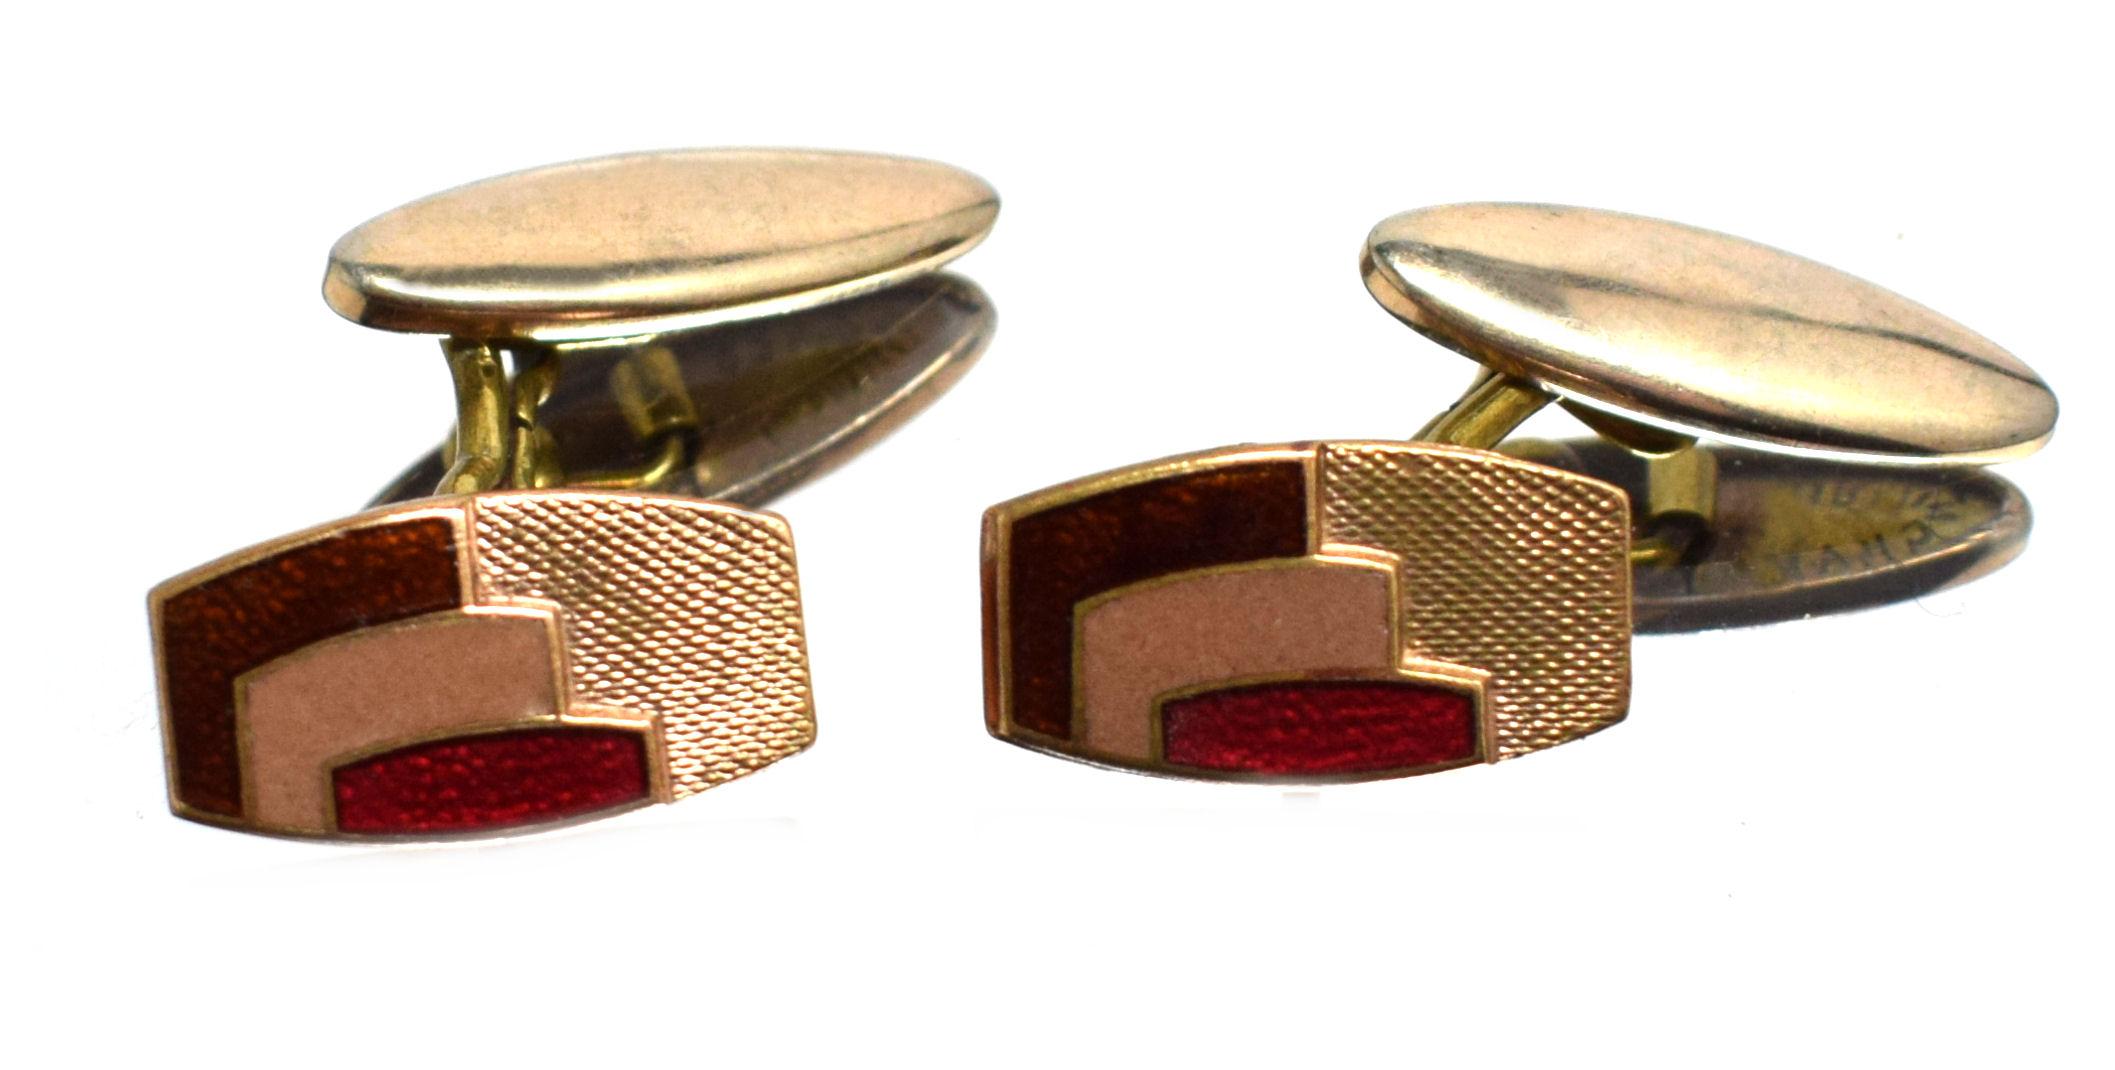 For your consideration are these wonderful and original 1930s Art Deco three toned gents cufflinks. Slightly staggered and raised three toned enamel cufflinks on a rolled rose gold backing with chain links. Very stylish and suitable for both day and